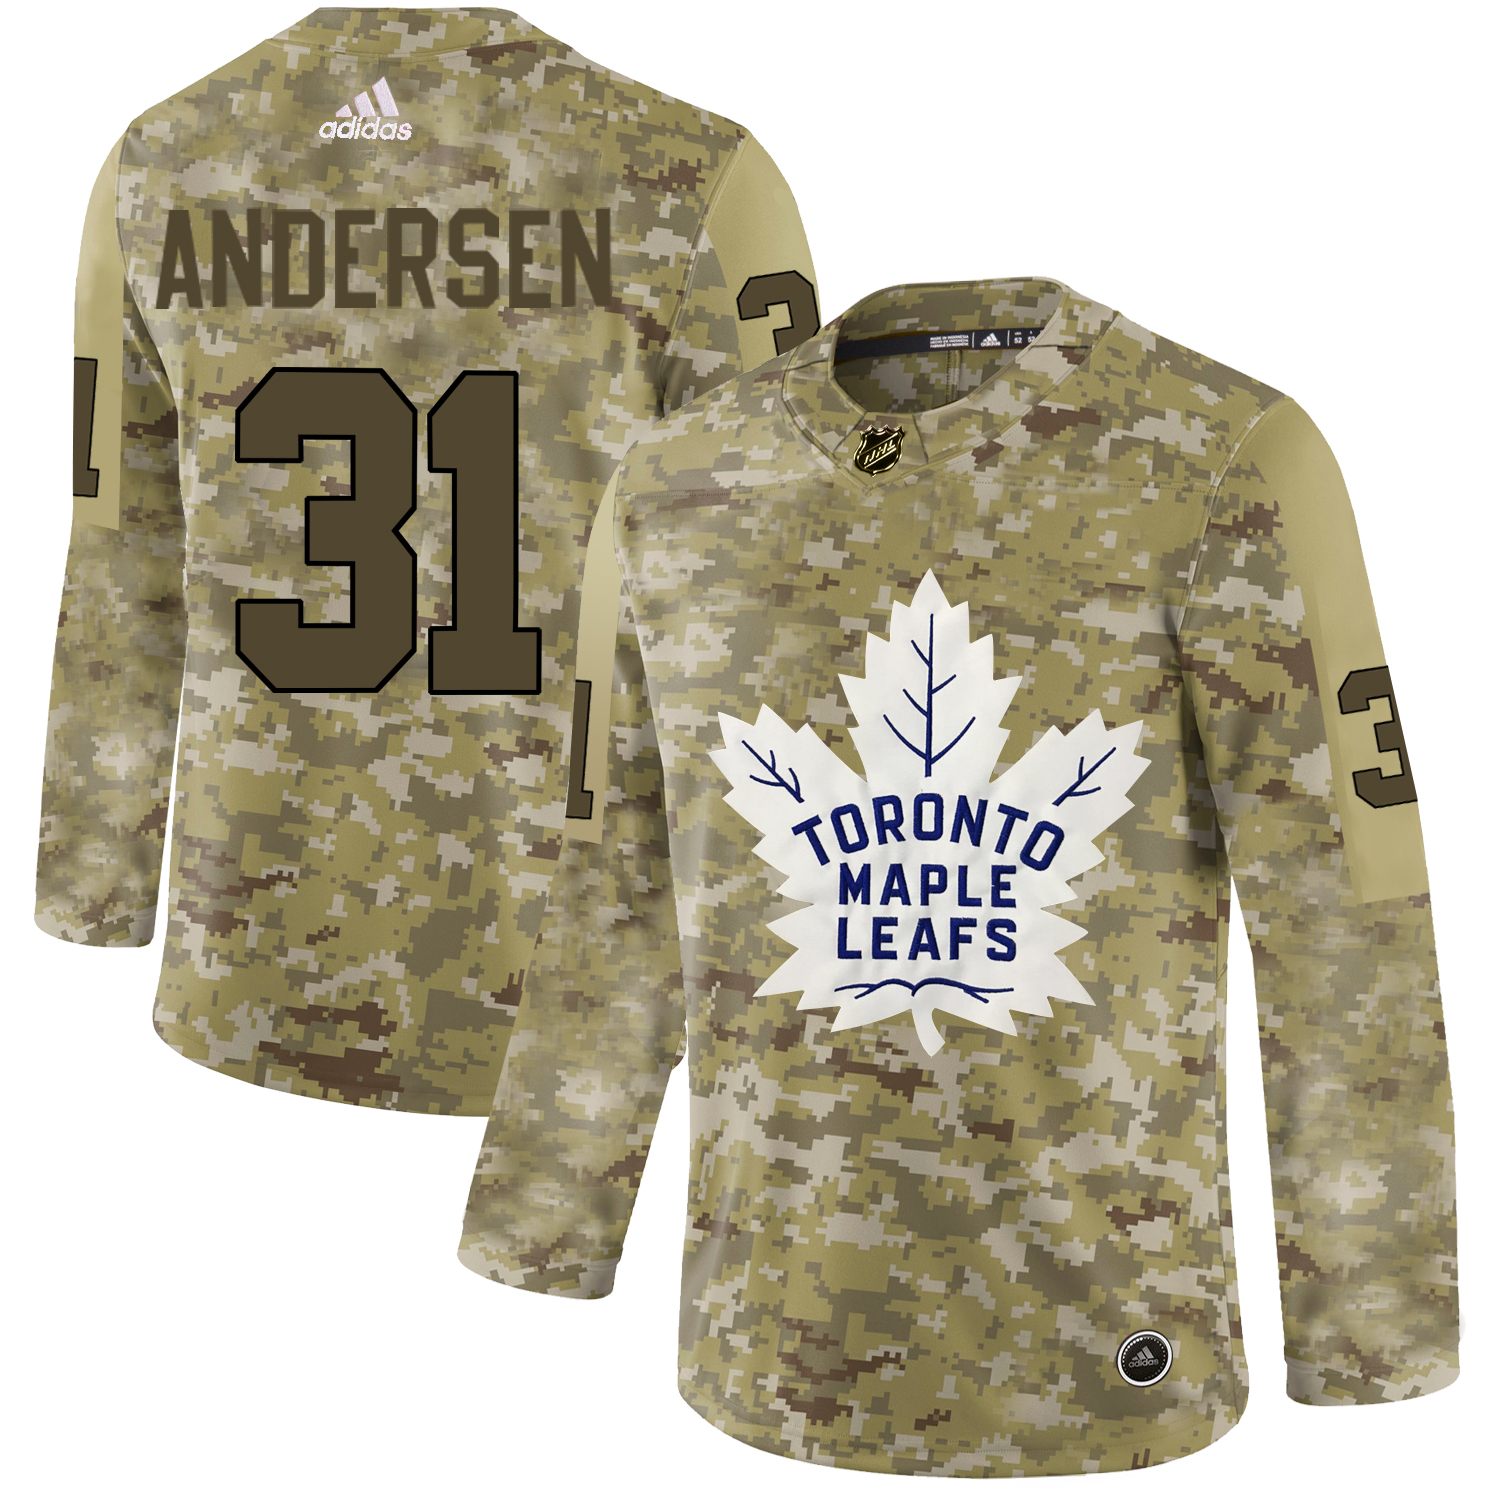 Adidas Maple Leafs #31 Frederik Andersen Camo Authentic Stitched NHL Jersey